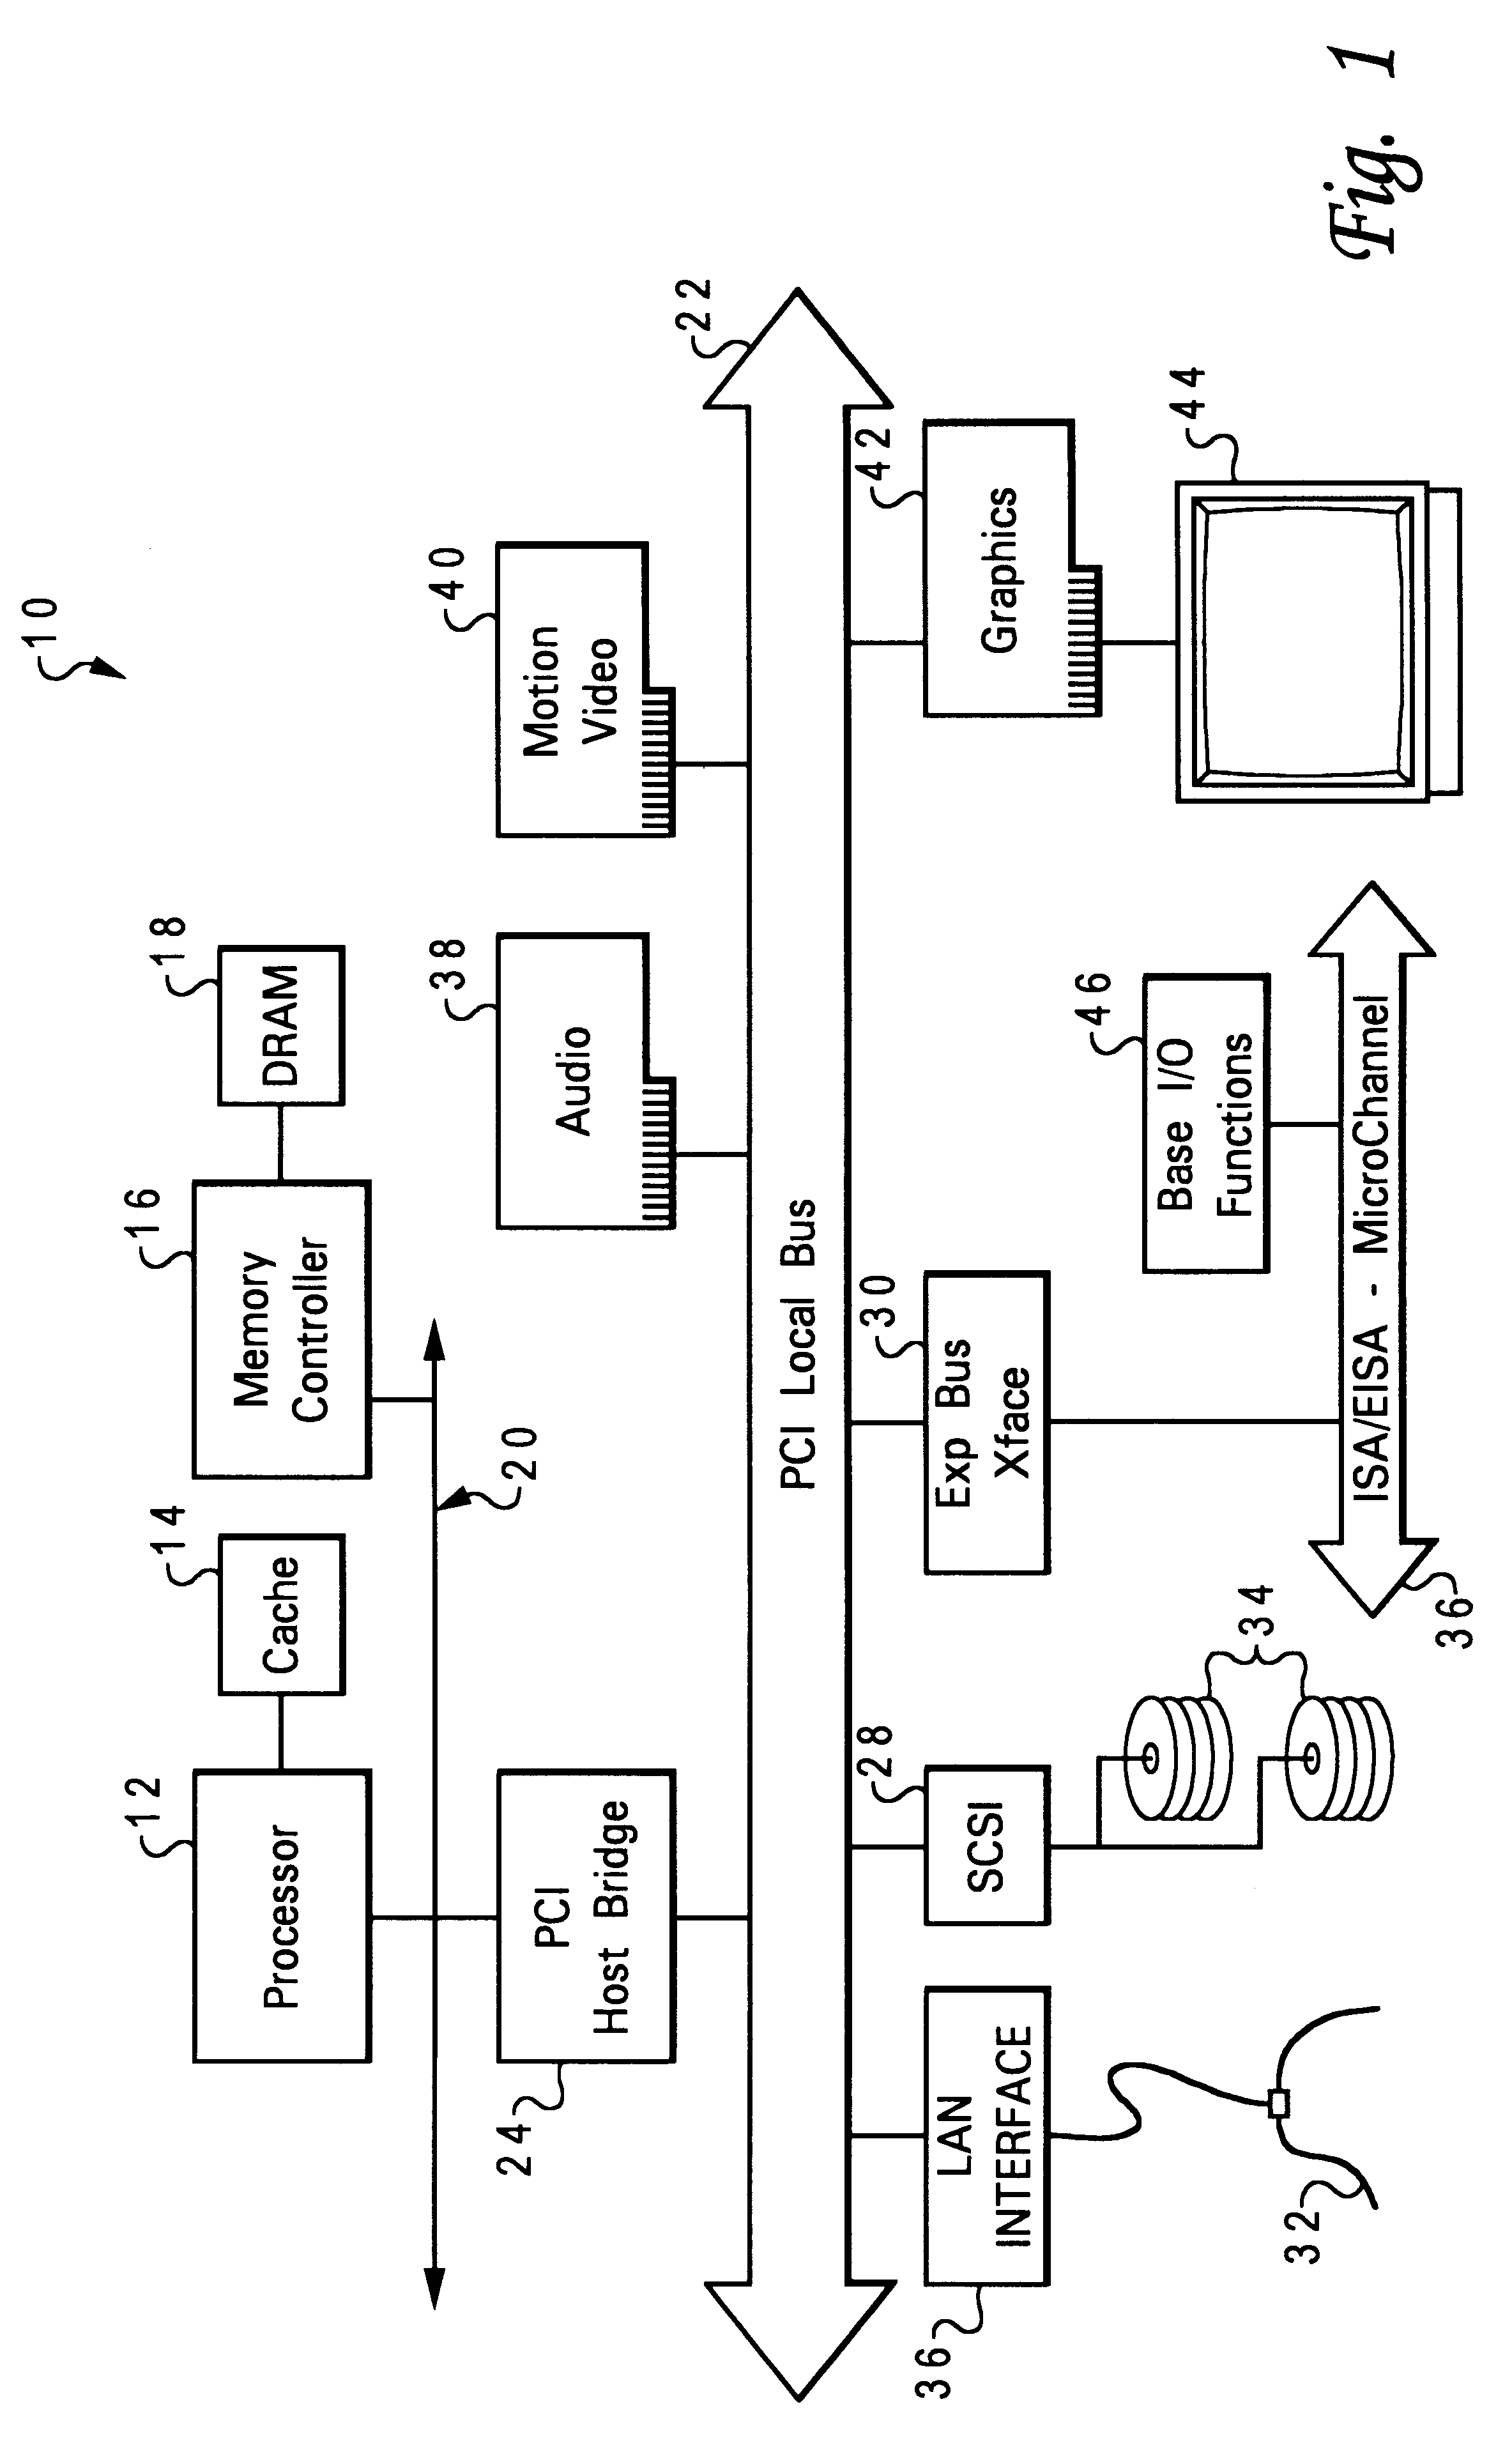 Method and system for supporting peripheral component interconnect (PCI) peer-to-peer access across a PCI host bridge supporting multiple PCI buses